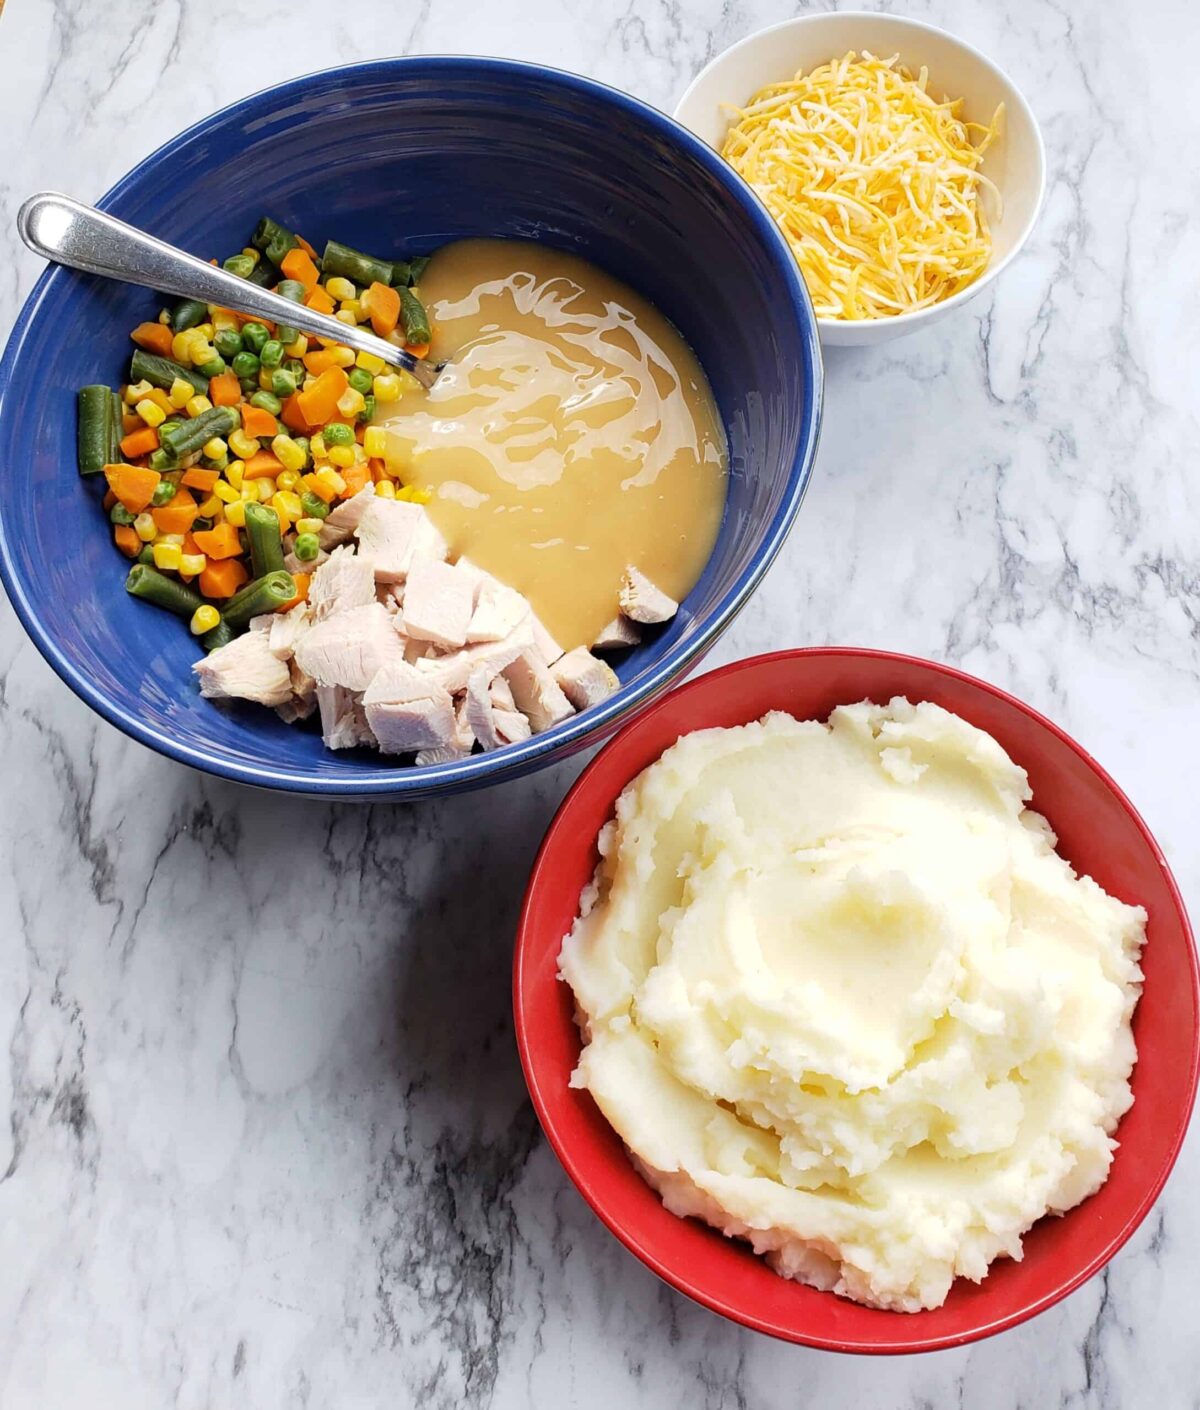 Blue bowl filled with mixed vegetables, chopped turkey, and gravy. Red bowl of mashed potatoes. small white bowl of shredded cheese.